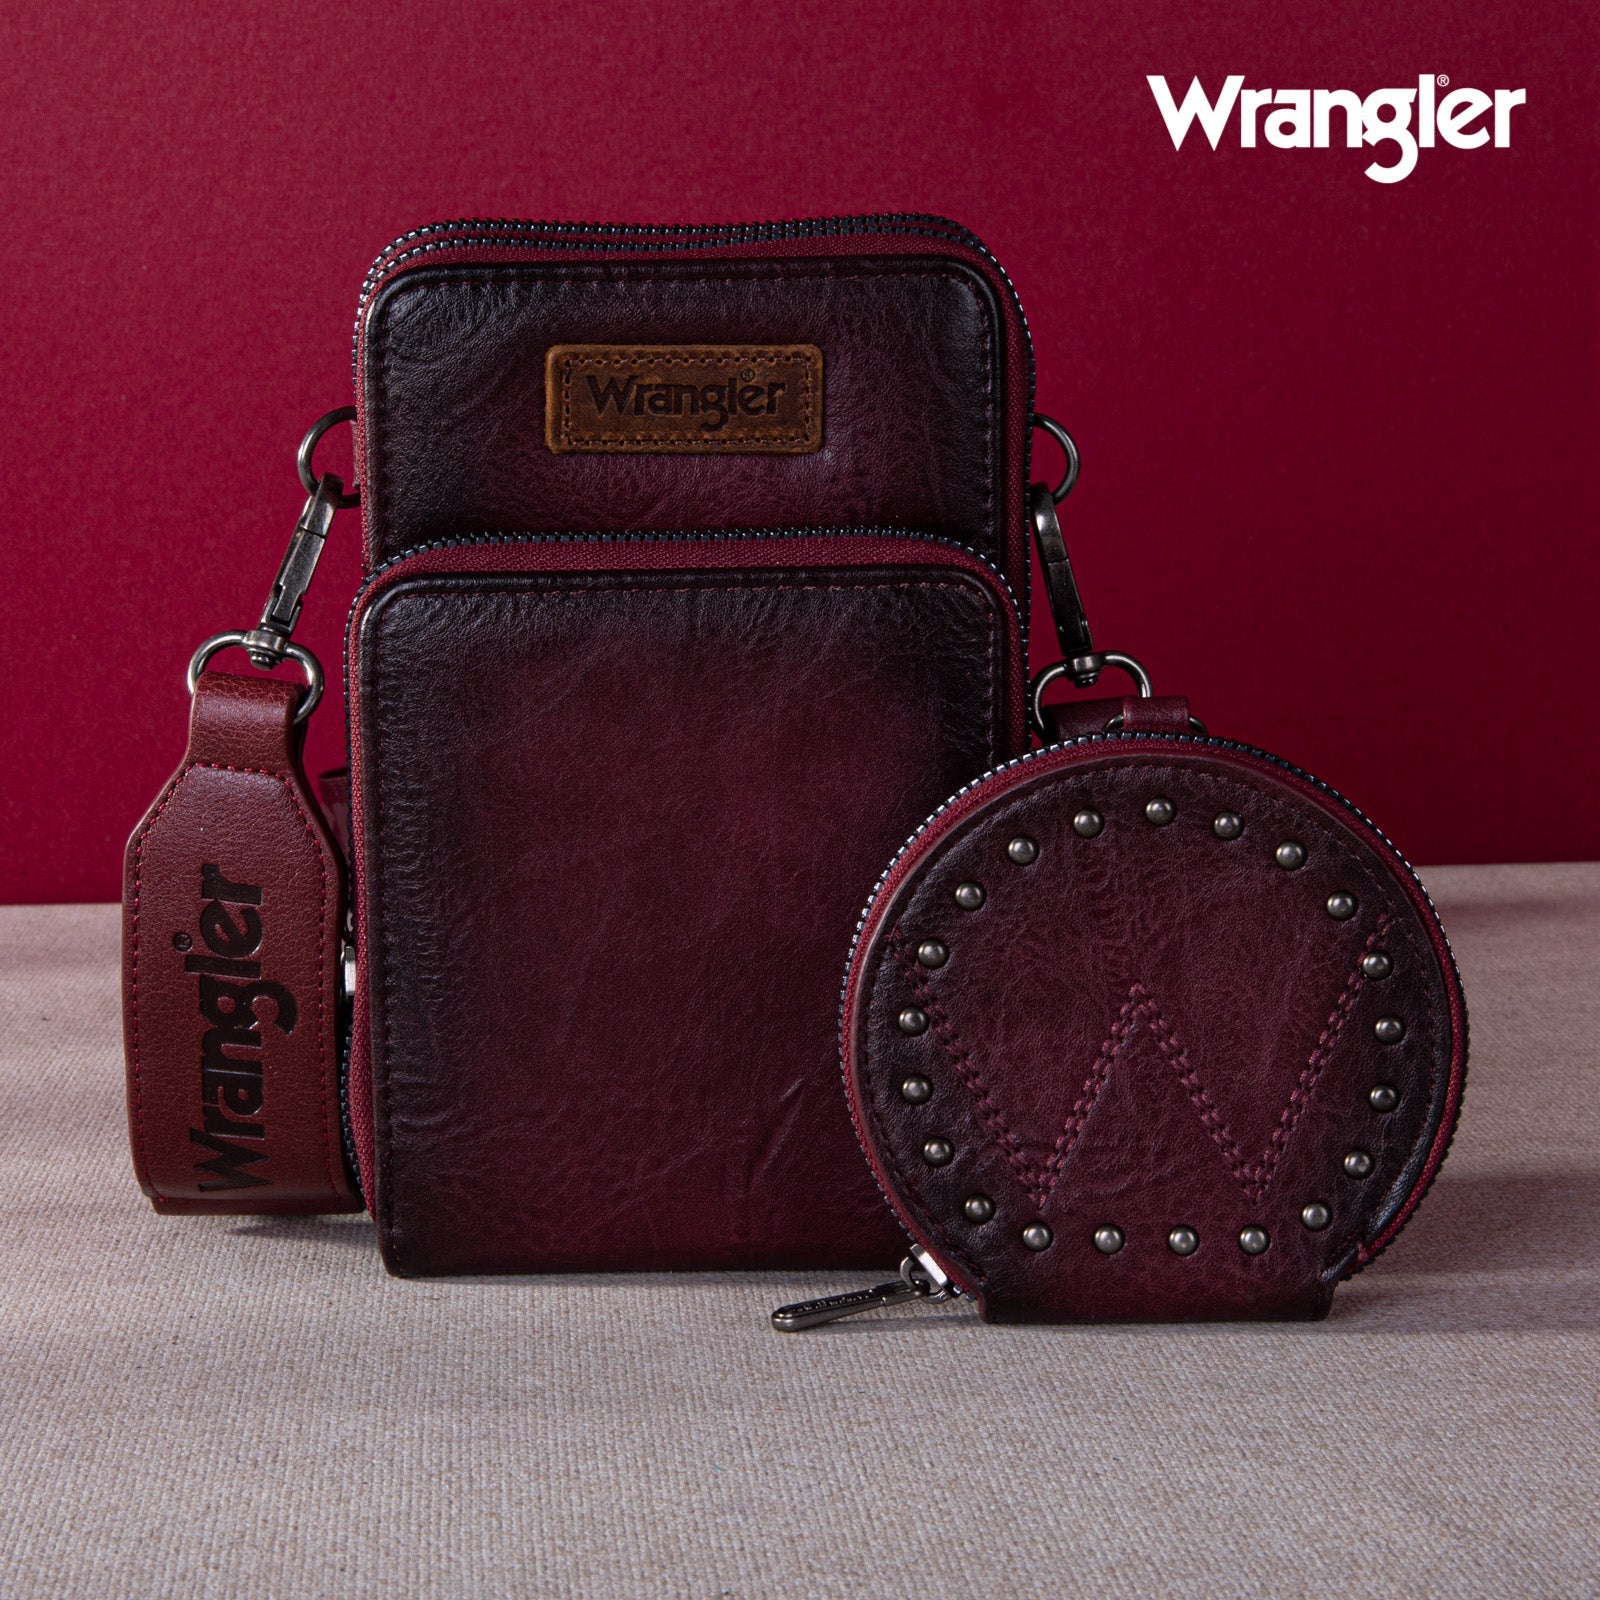 Wrangler Crossbody Cell Phone Purse 3 Zippered Compartment with Coin Pouch - Montana West World